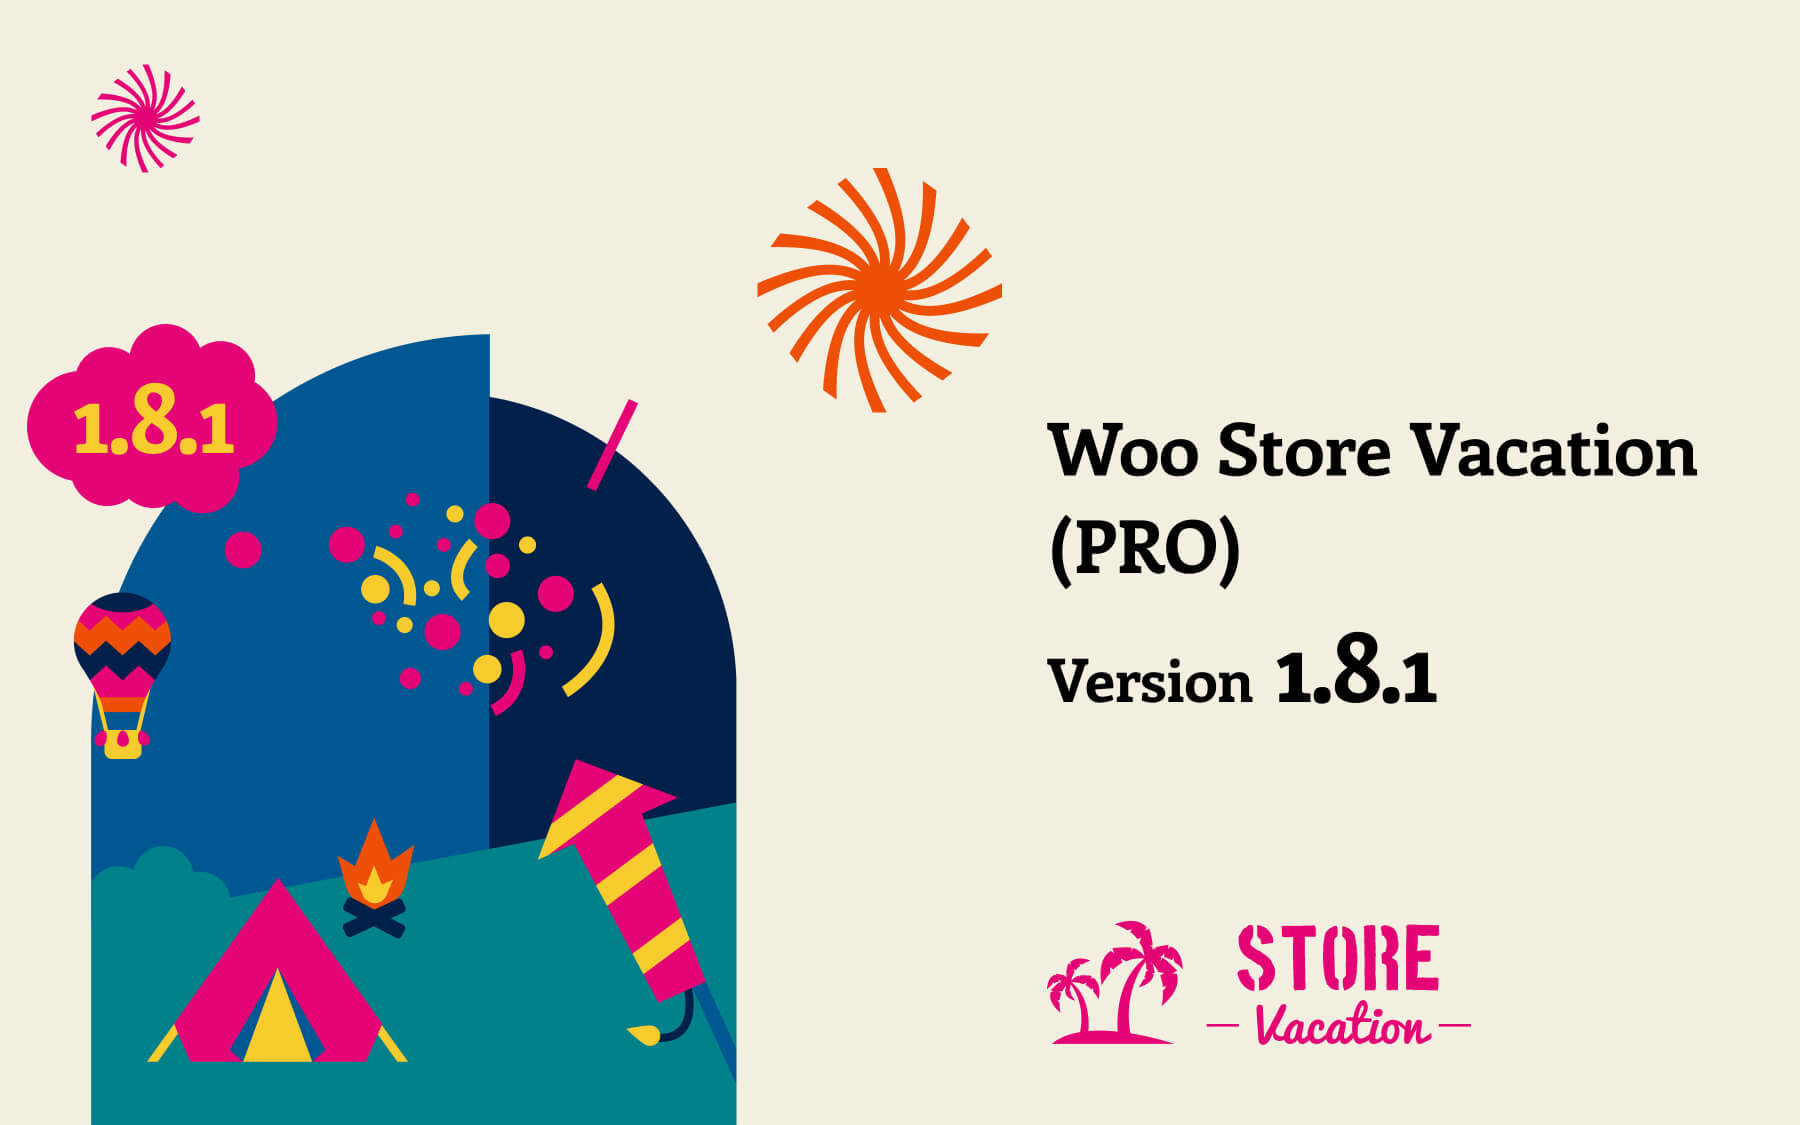 Introducing Woo Store Vacation PRO 1.8.1